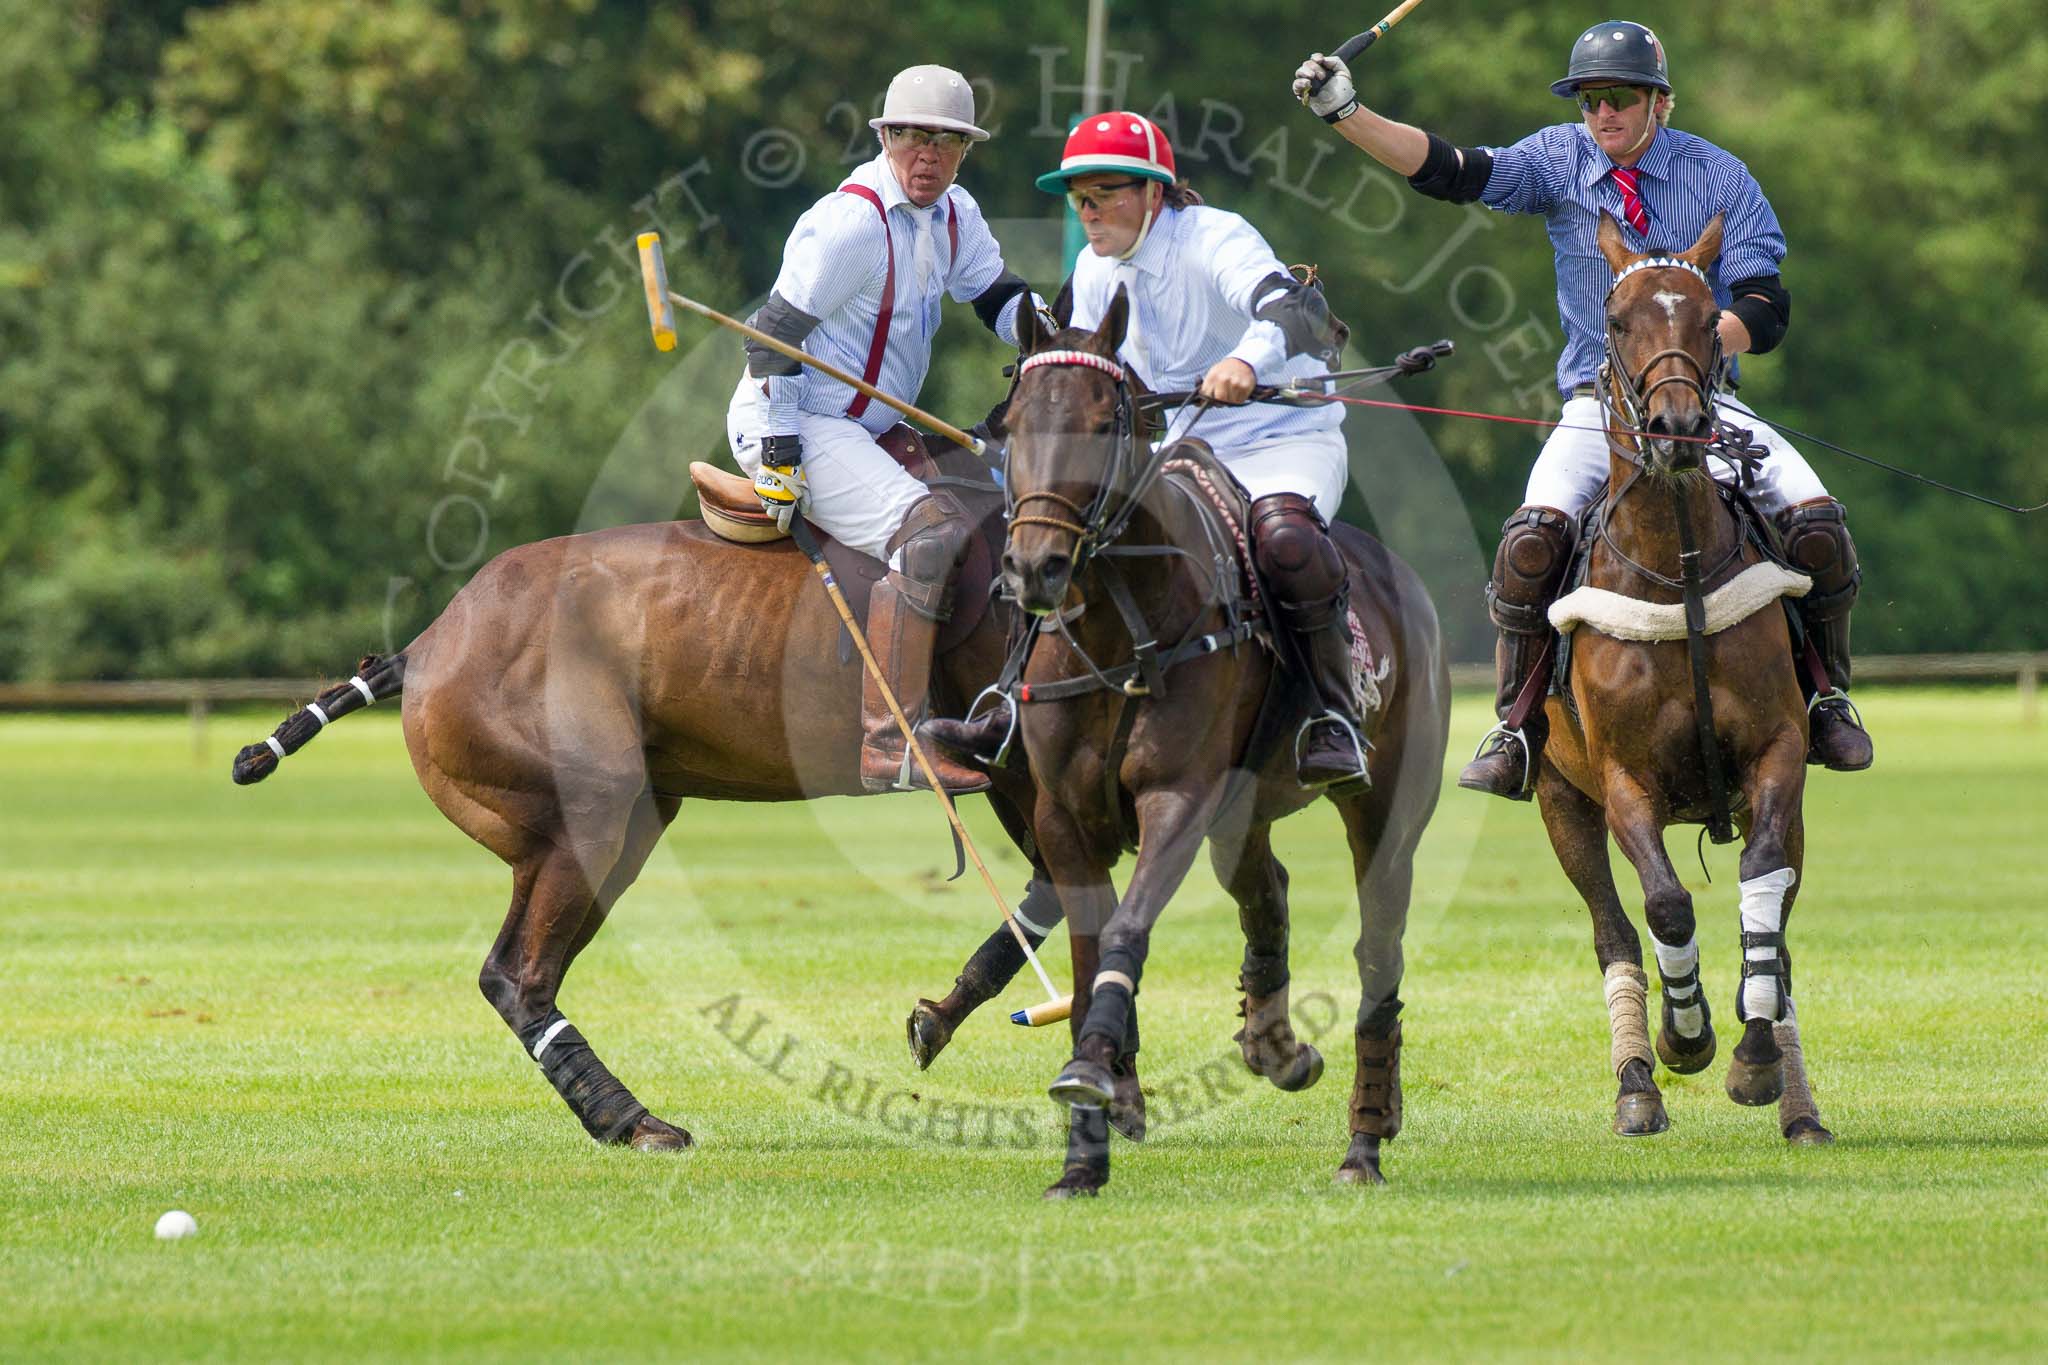 7th Heritage Polo Cup finals: La Mariposa Argentina Sebastian Funes on the ball..
Hurtwood Park Polo Club,
Ewhurst Green,
Surrey,
United Kingdom,
on 05 August 2012 at 13:23, image #20